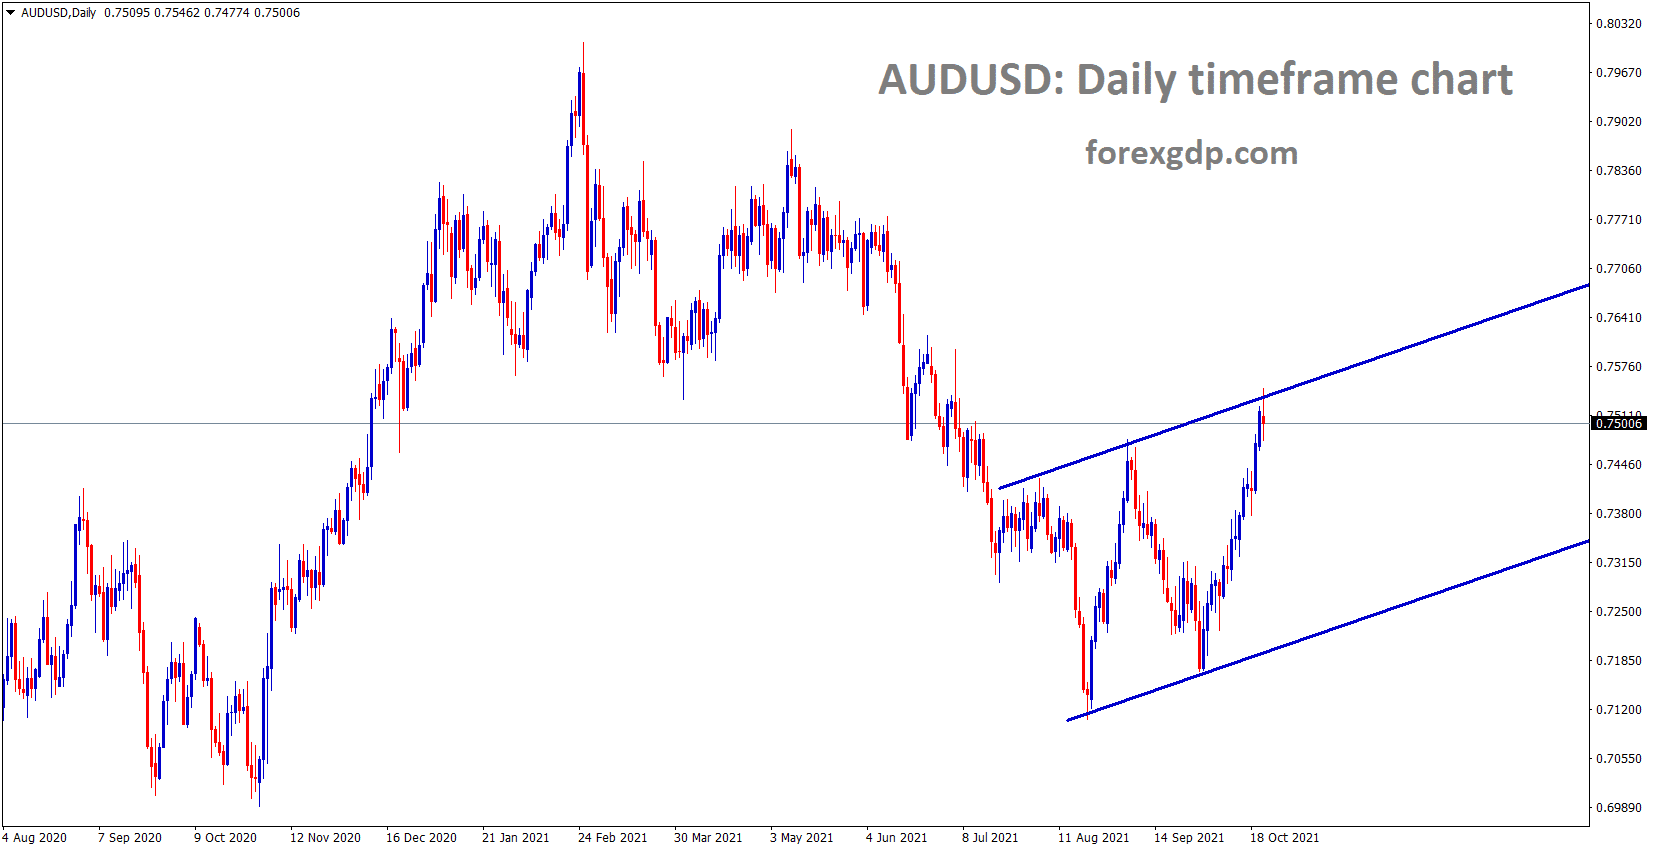 AUDUSD is making a small correction after hitting the higher high of the range